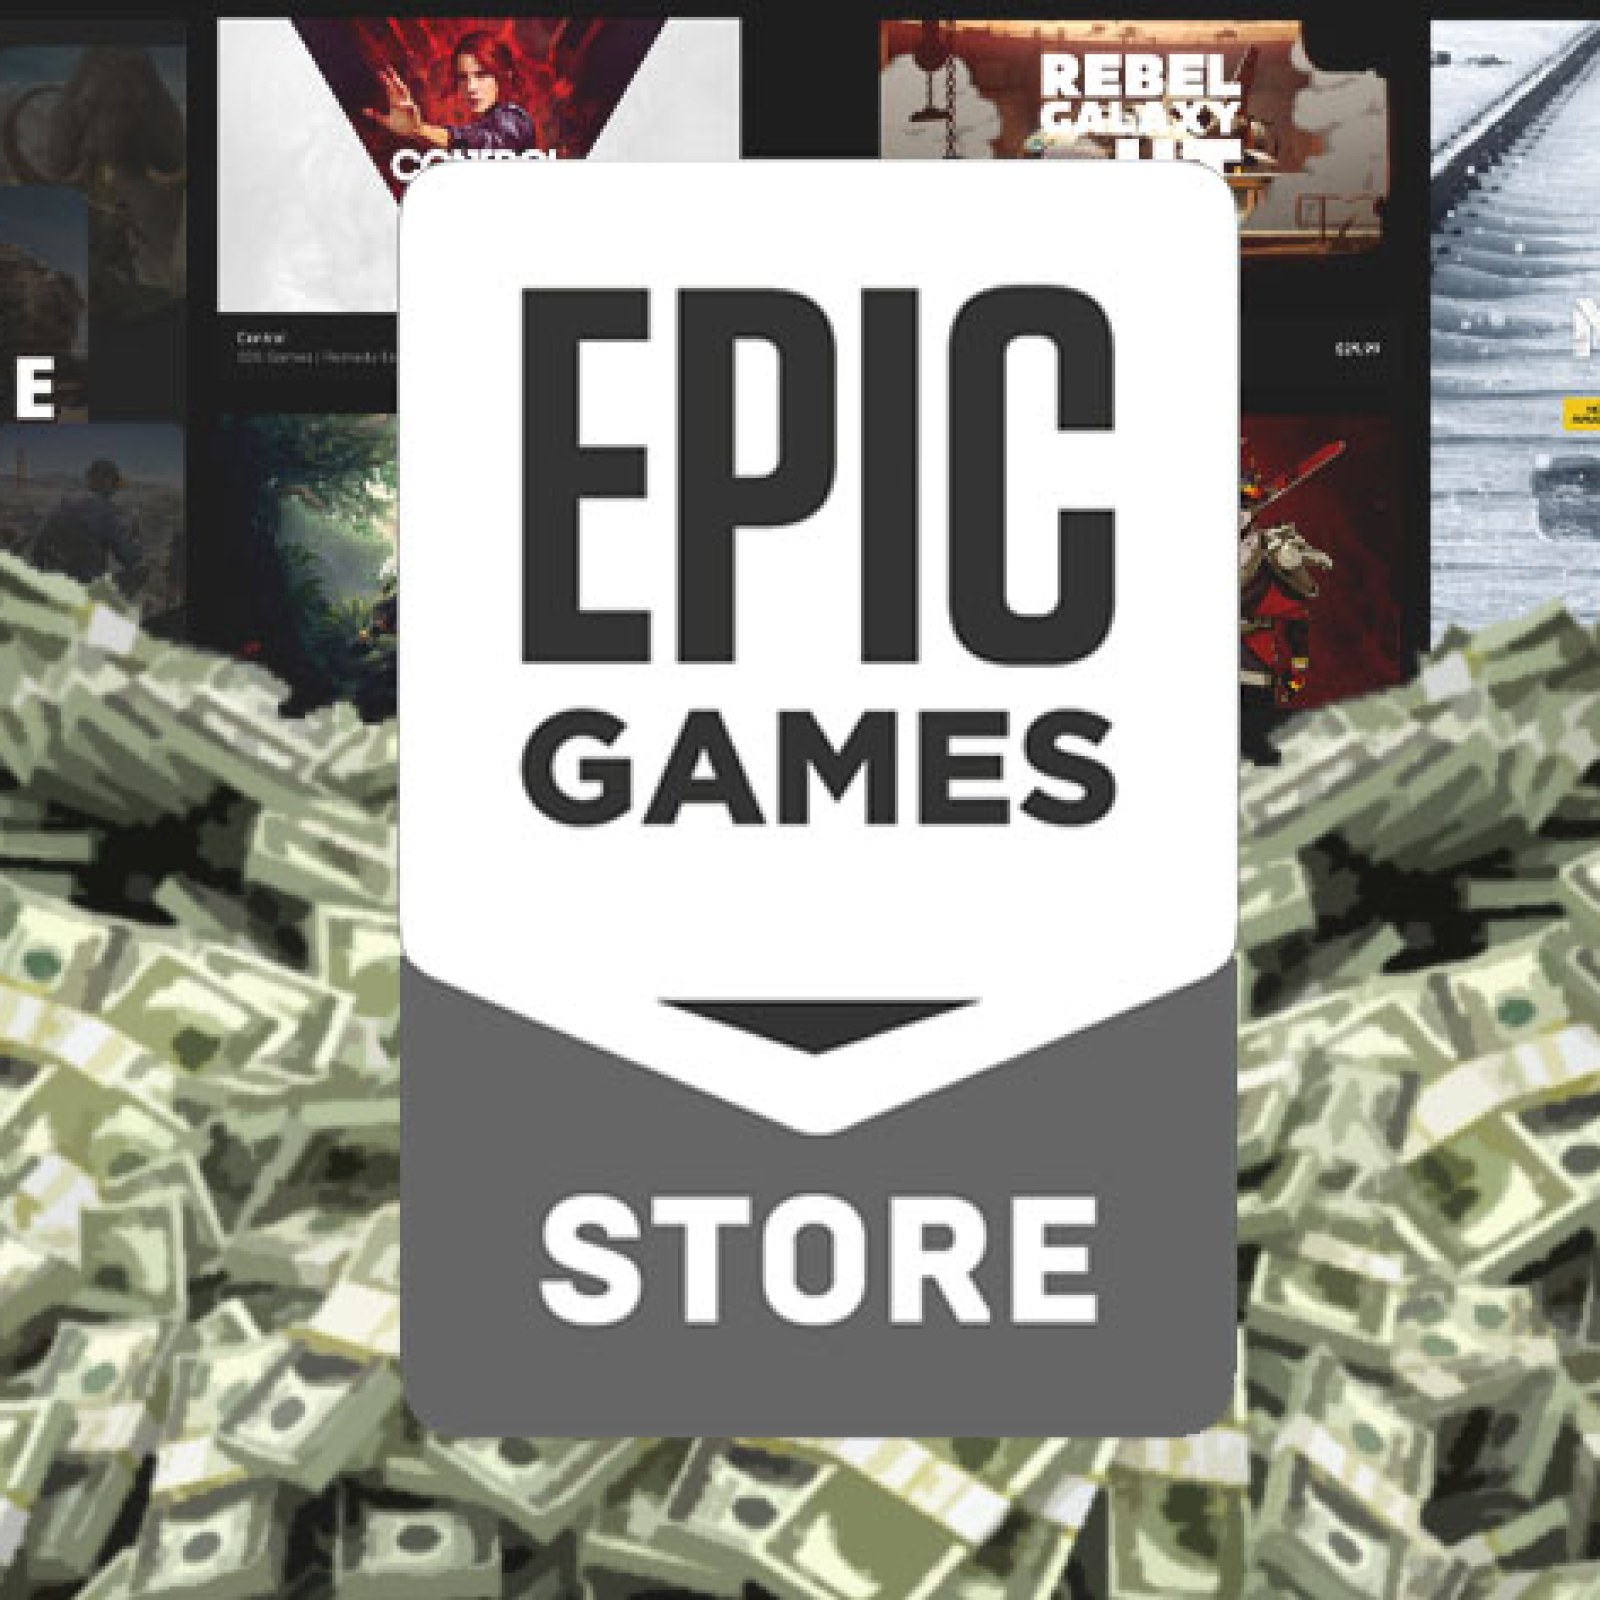 40 percent of Epic Games Store users say they don't have Steam